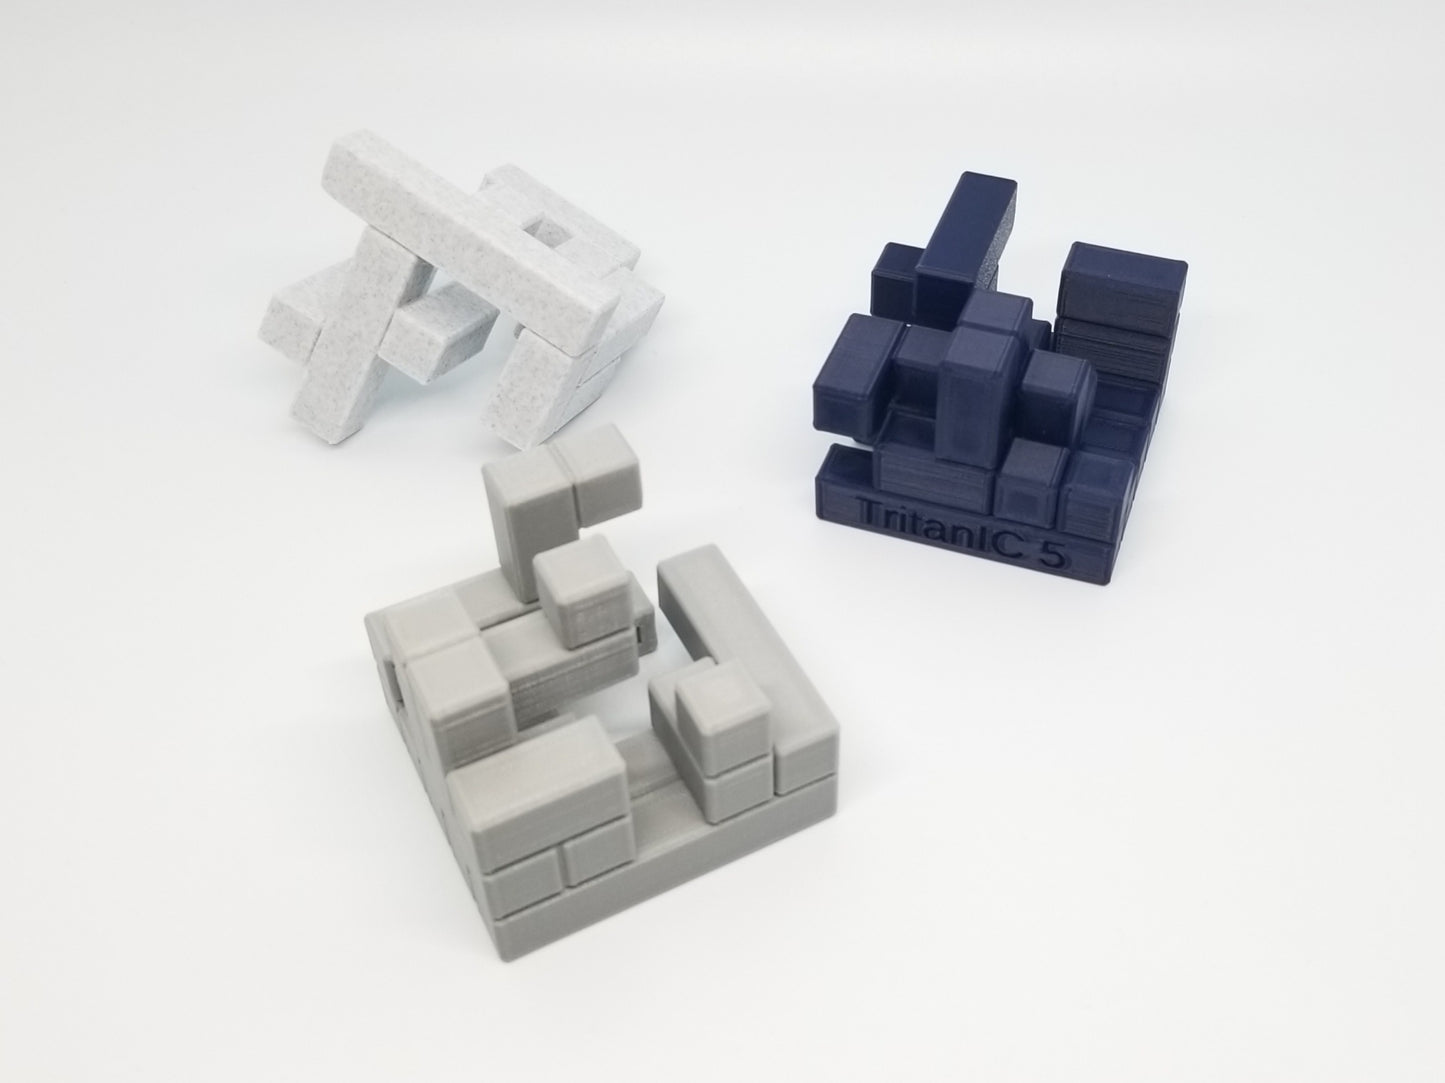 Download 3D Printable STL Files for 6 Three Piece 5x5x5 Turning Interlocking Cube Puzzles